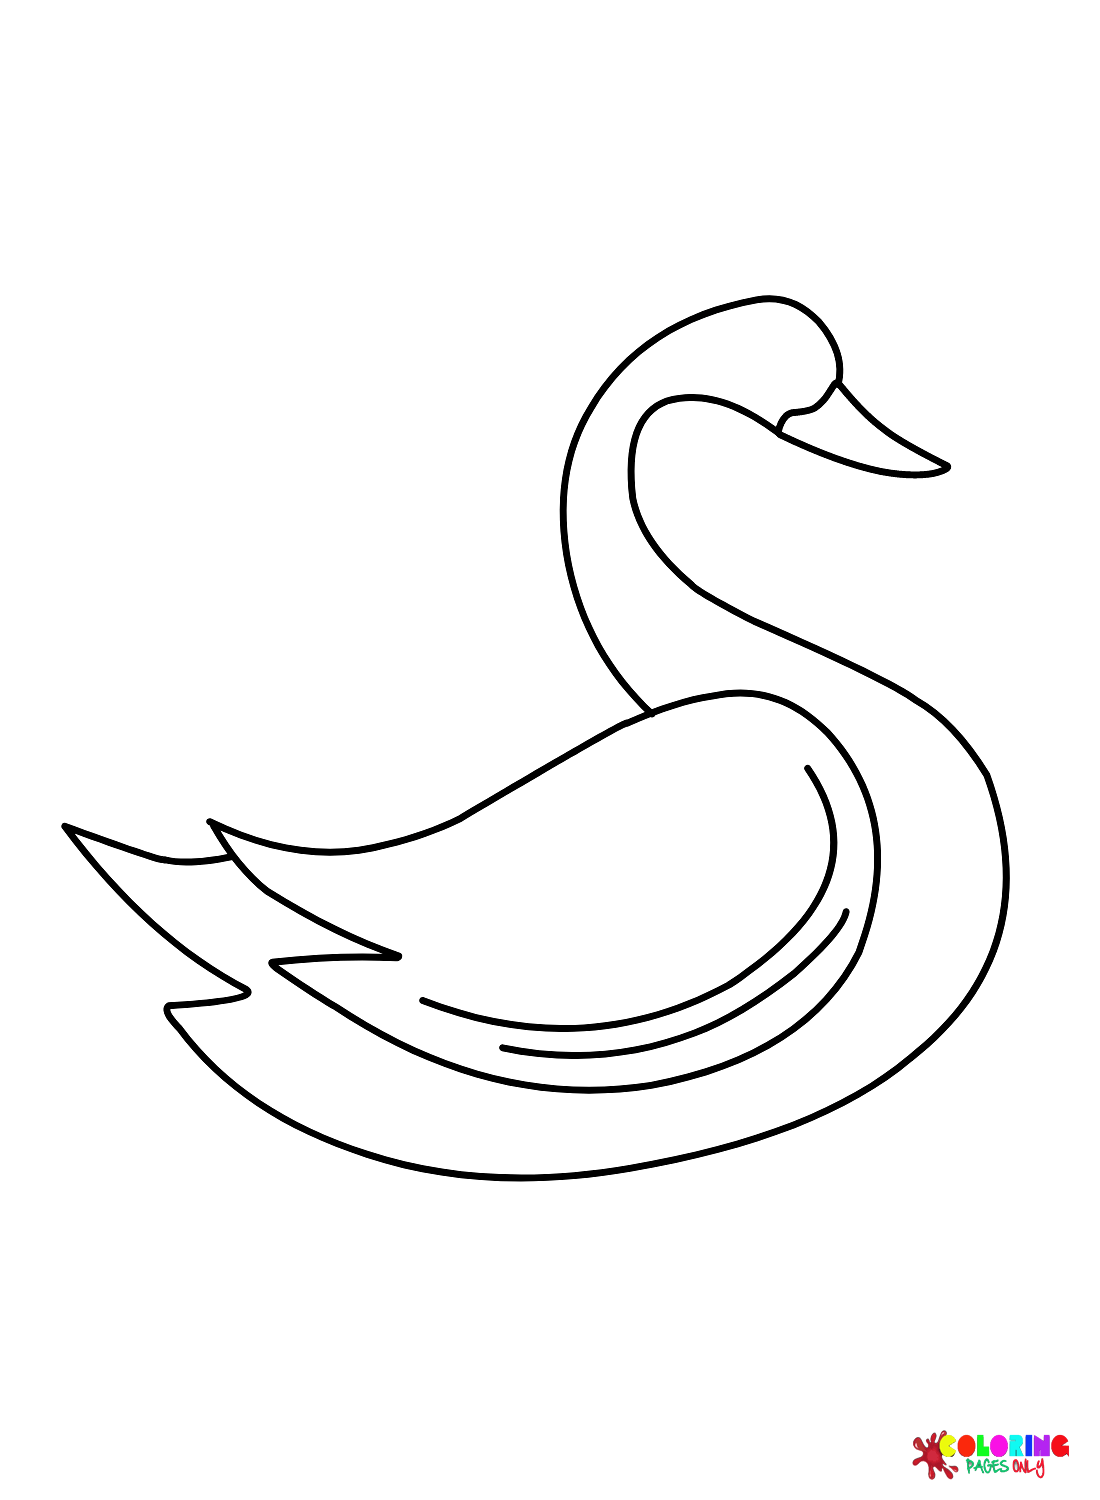 Swan to Print from Swan